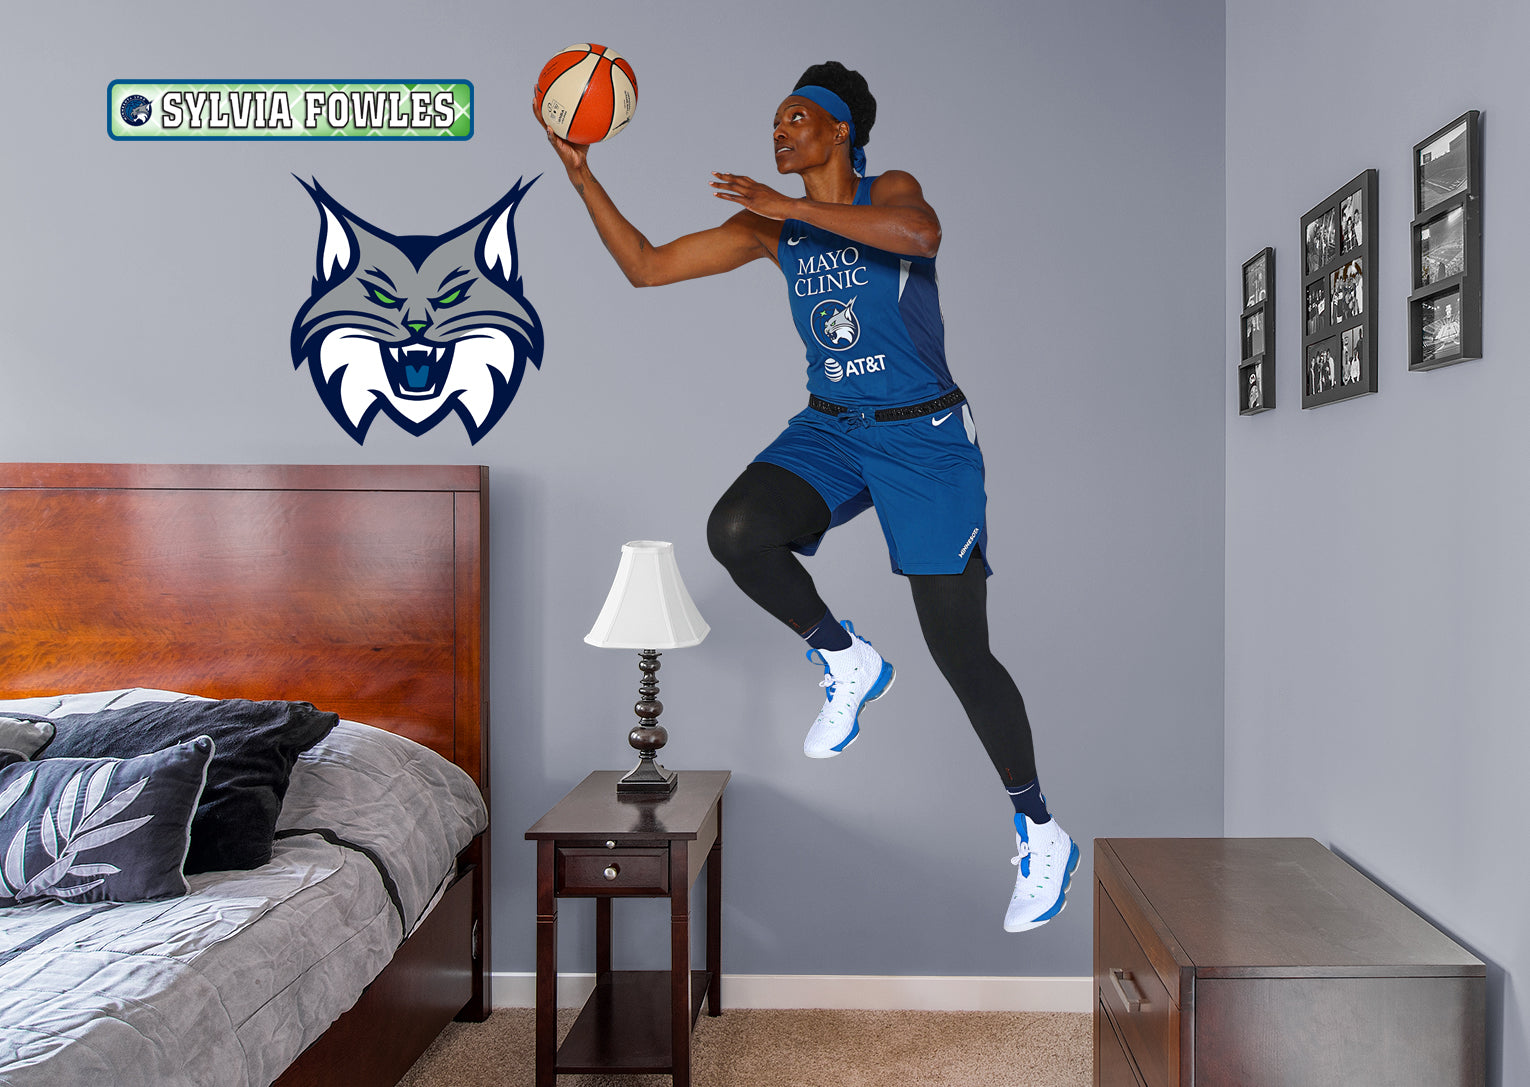 Sylvia Fowles 2020 RealBig for Minnesota Lynx - Officially Licensed WNBA Removable Wall Decal Life-Size Athlete + 2 Decals (31"W